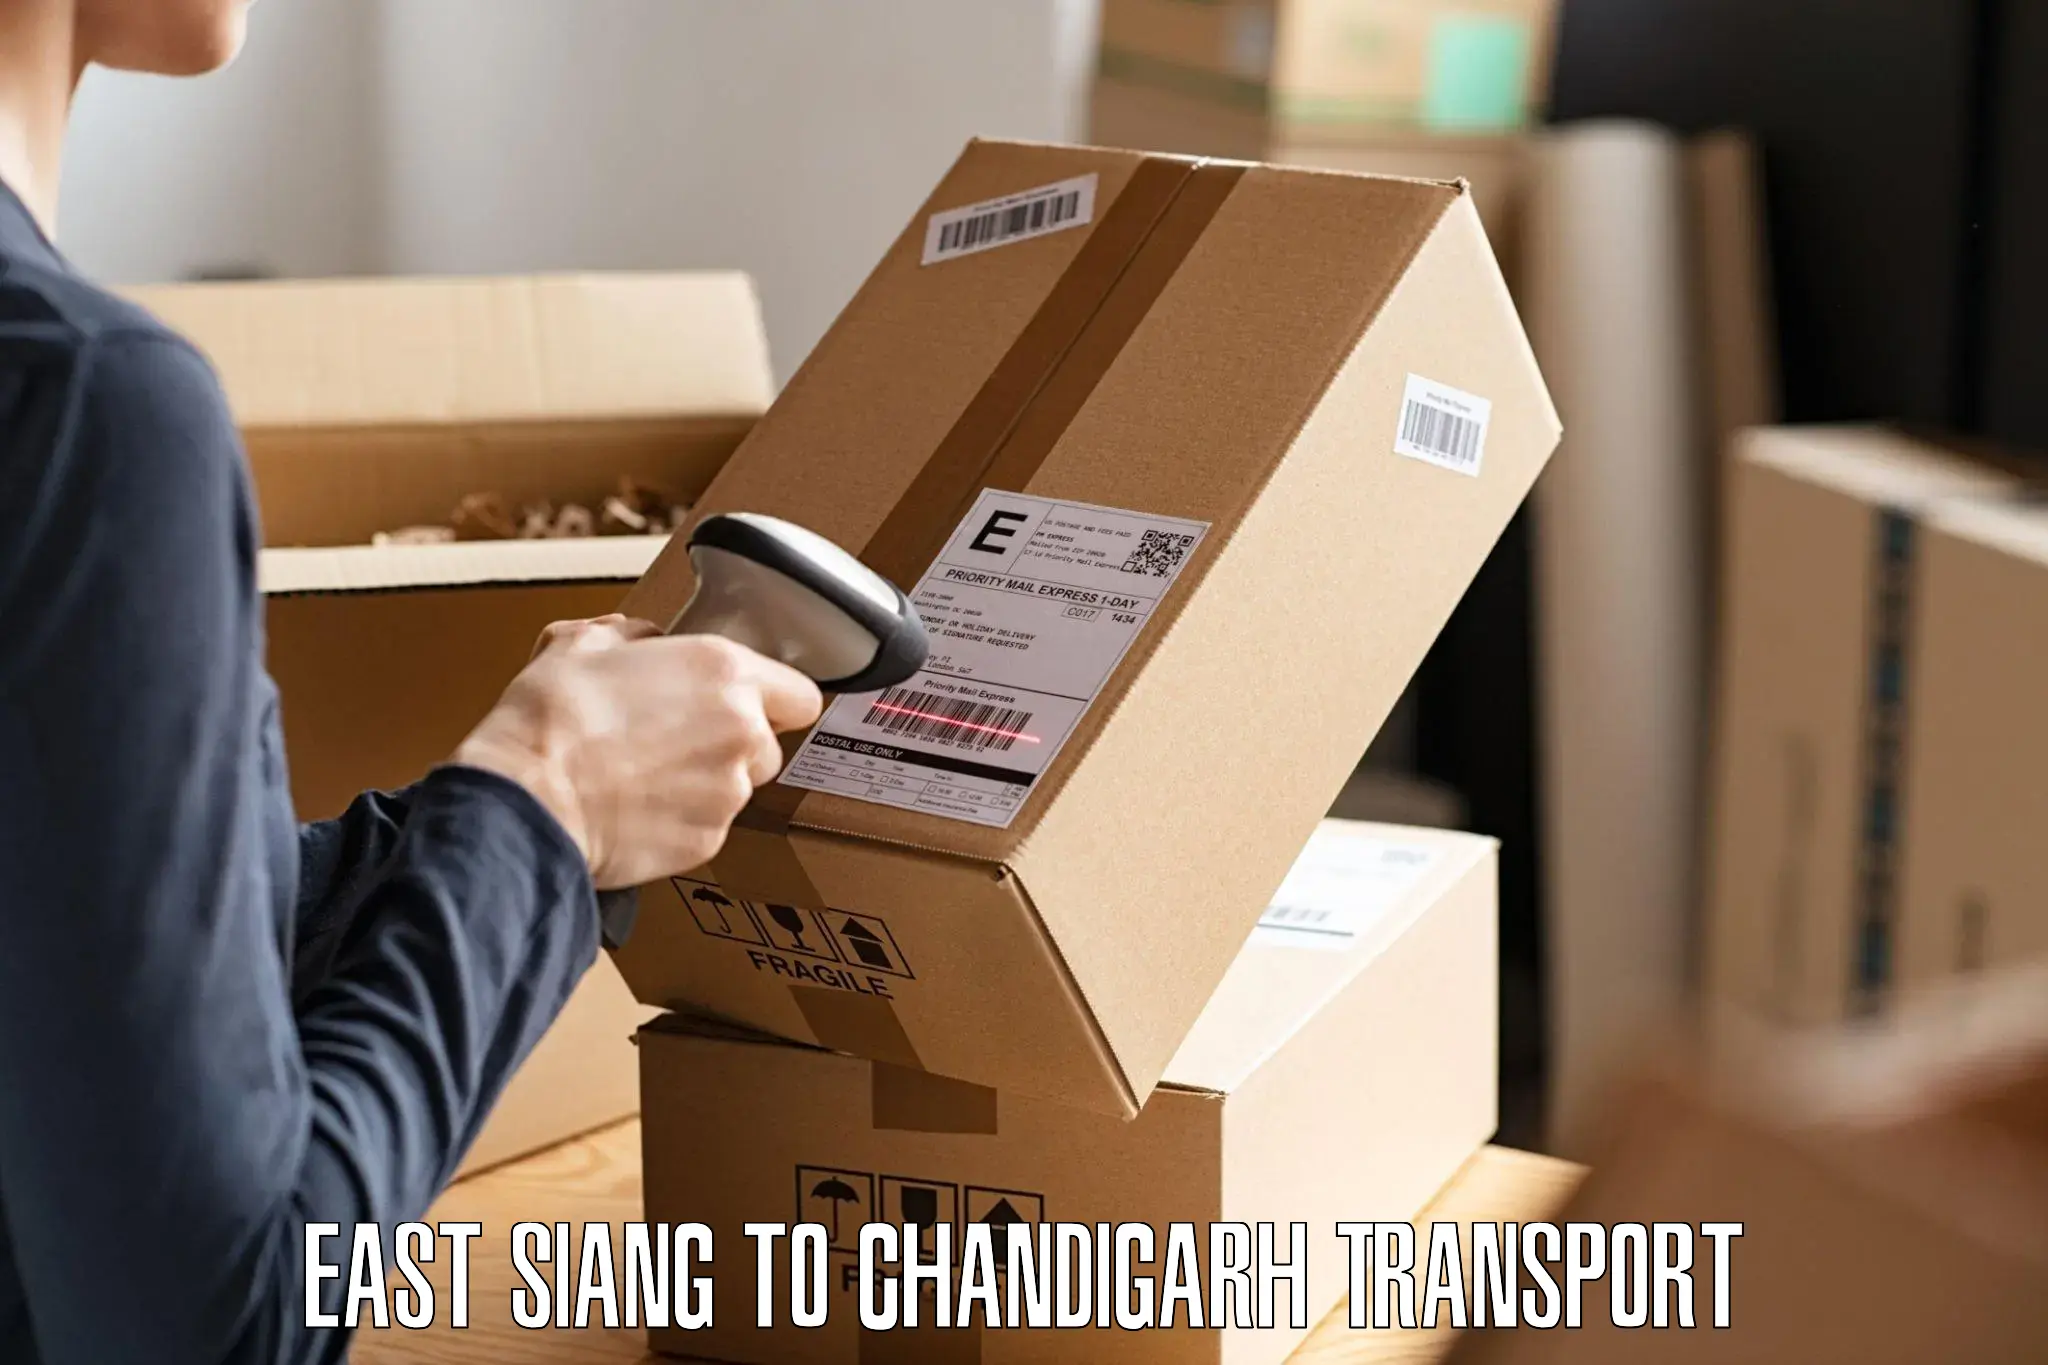 Daily transport service East Siang to Chandigarh